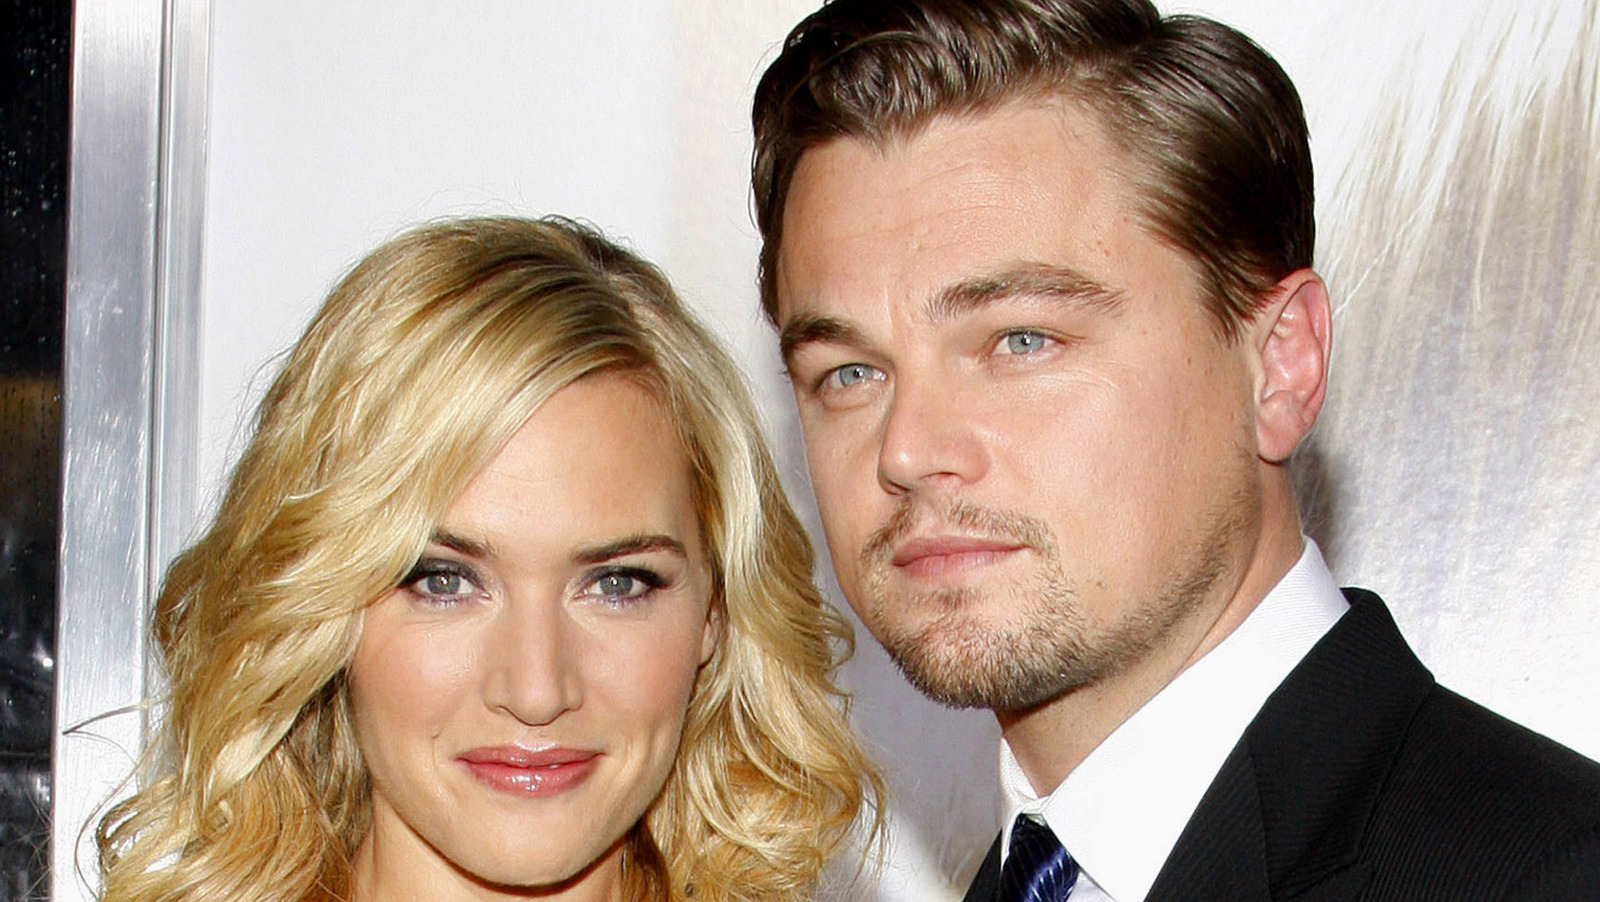 tidligste Kirken Opfylde Here's What We Know About Kate Winslet And Leonardo DiCaprio's Relationship